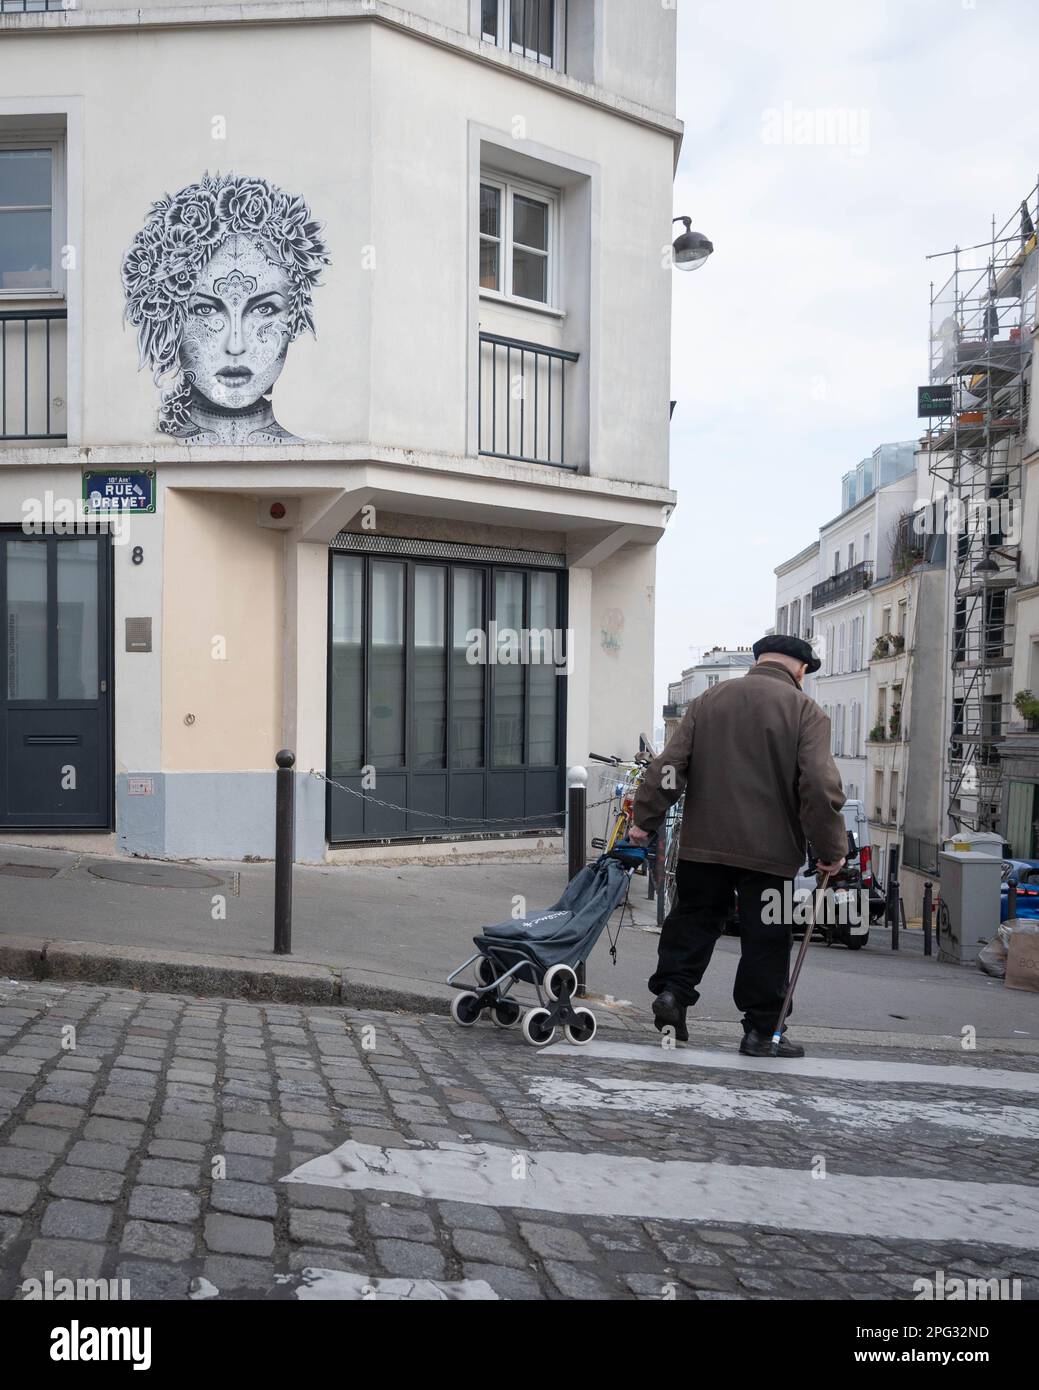 Old man with beret and shopping trolley waling past graffiti in Montmartre, Paris Stock Photo